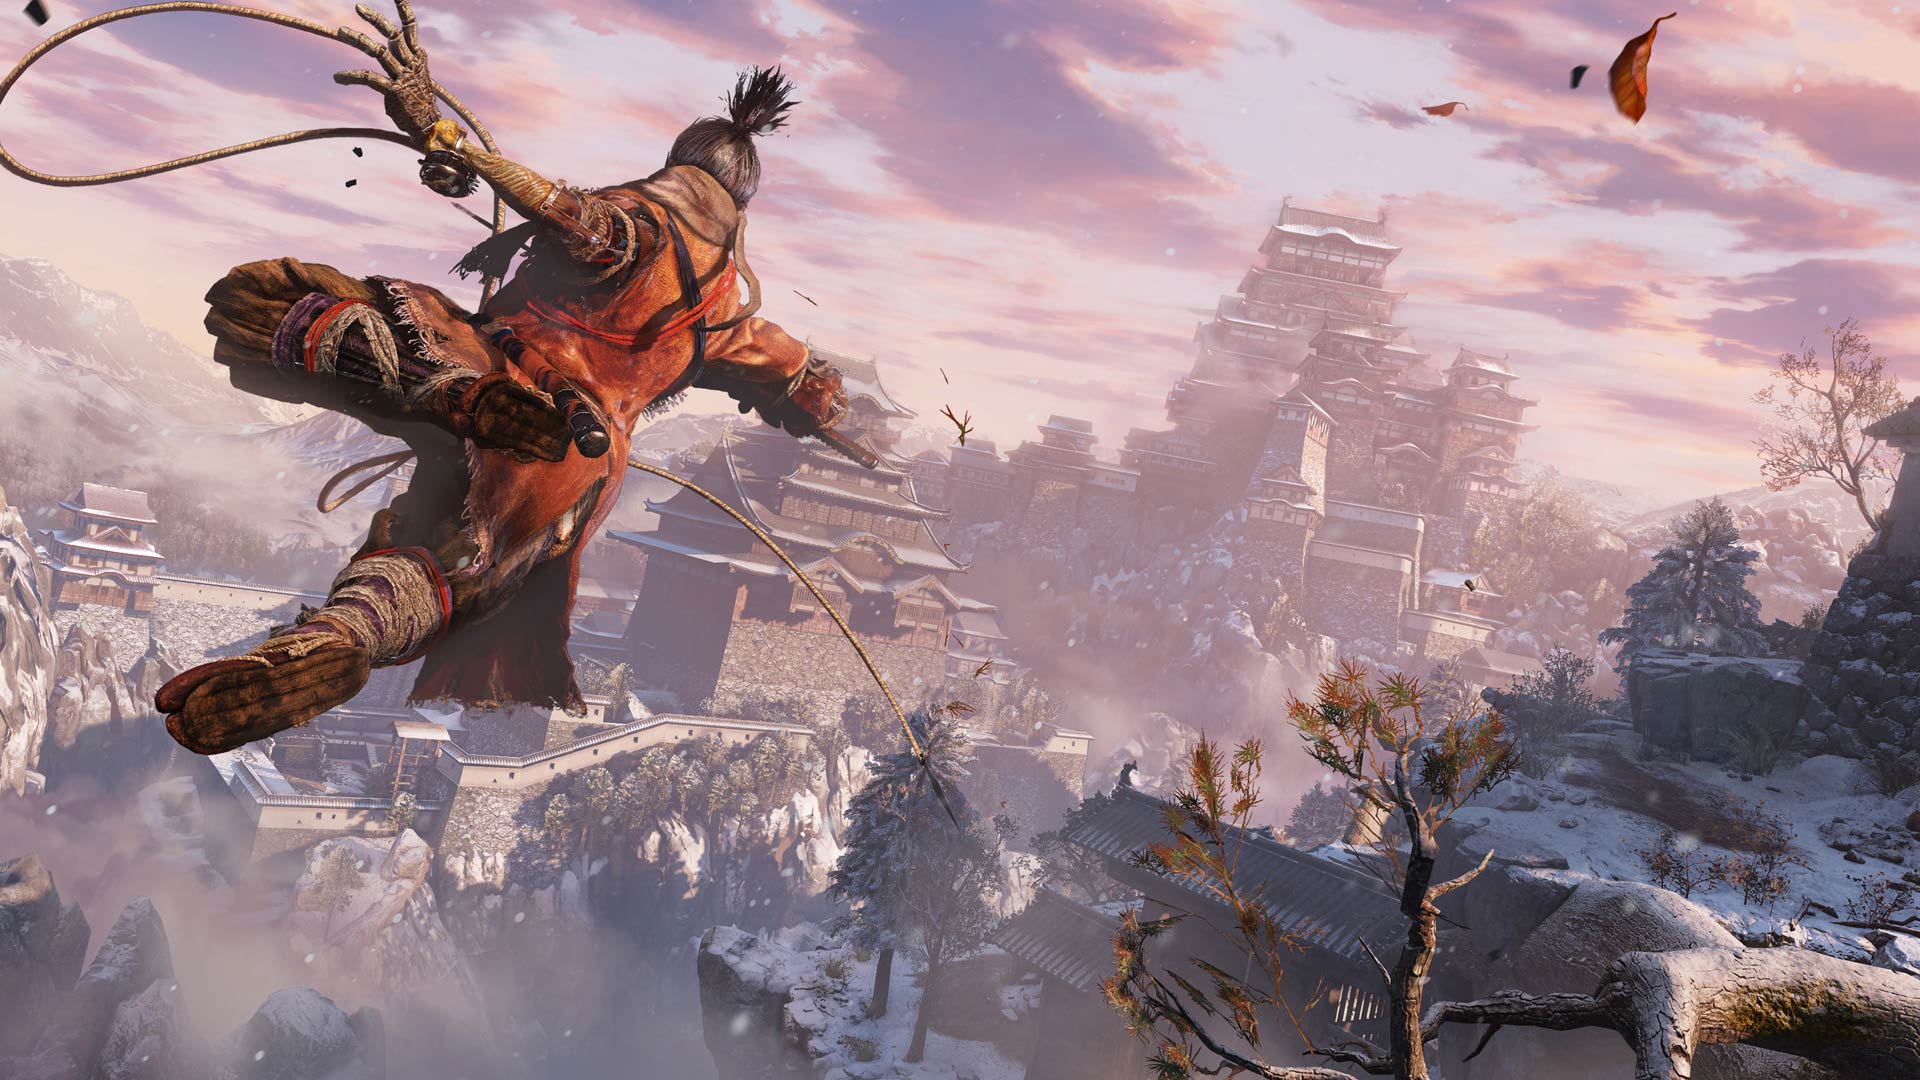 Sekiro: Shadows Die Twice System Requirements